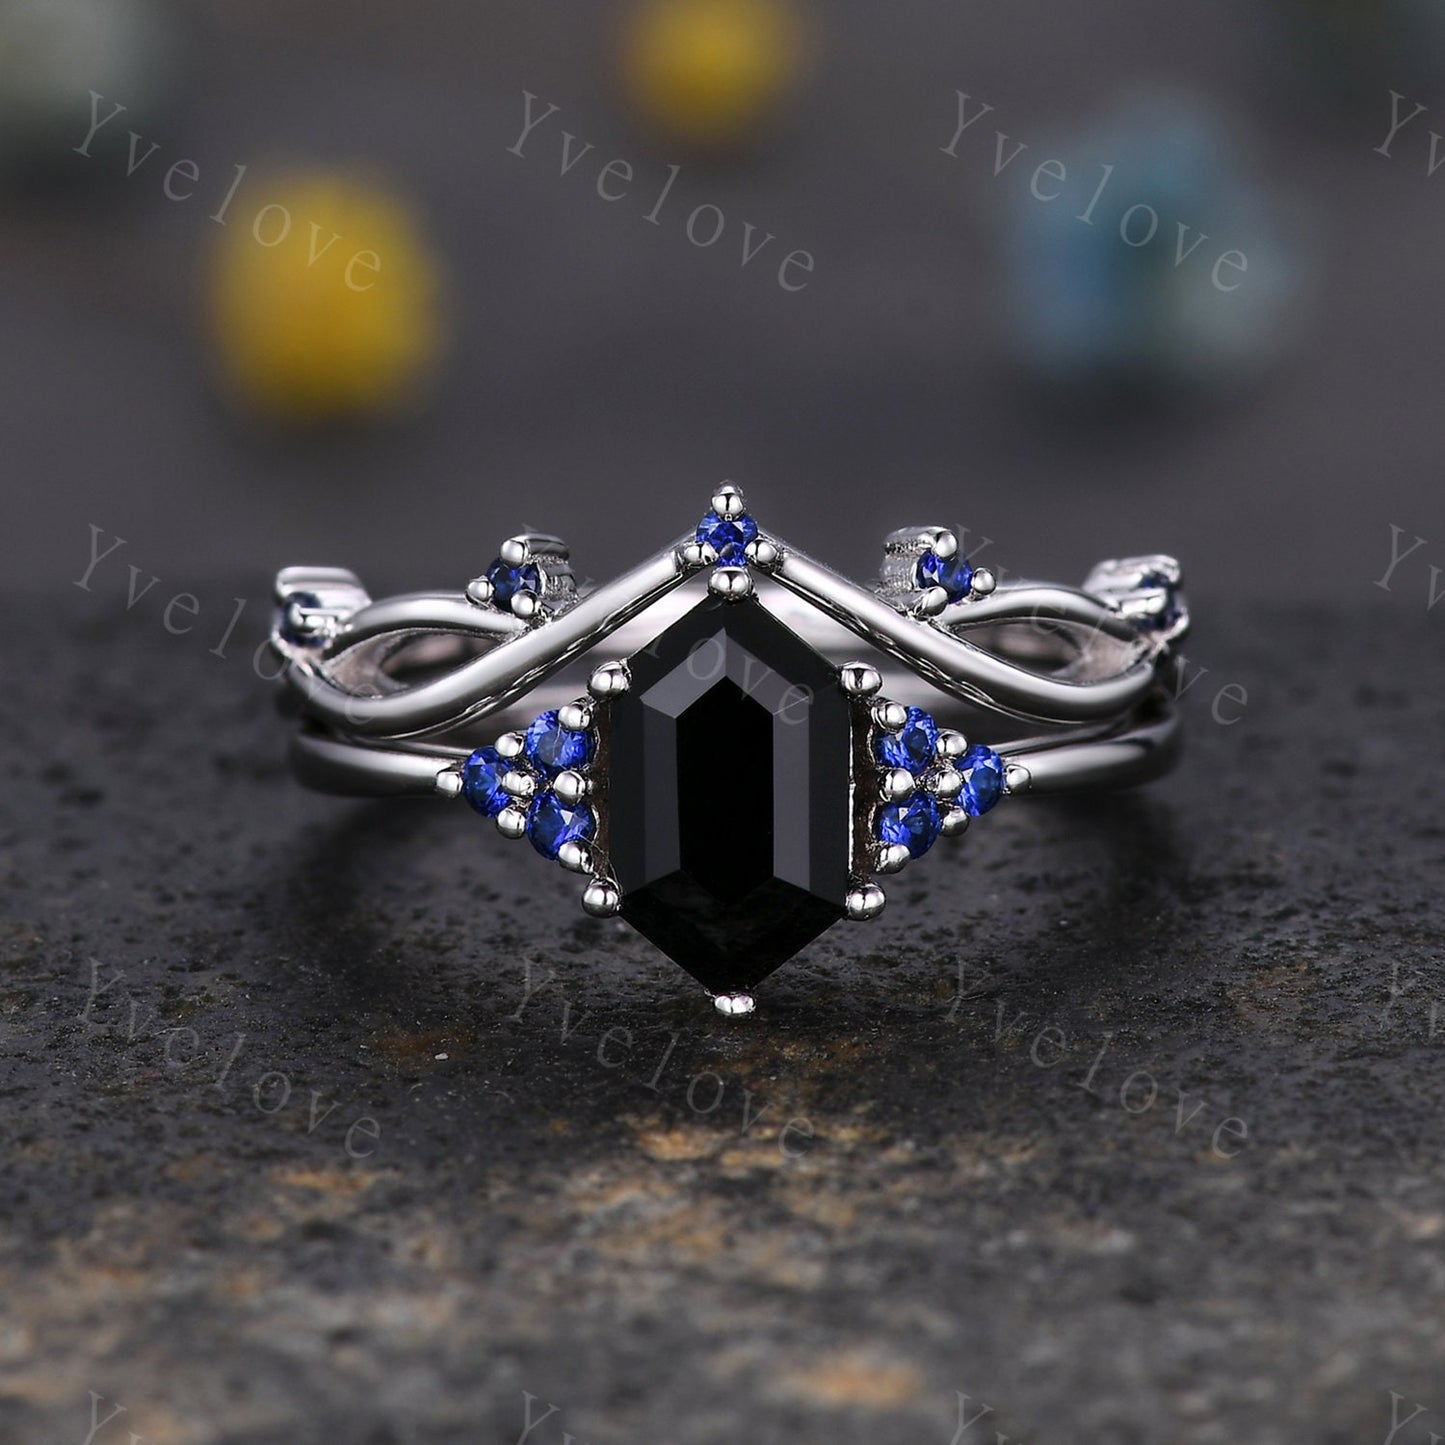 Retro hexagon Black Onyx Sapphire Ring,Vintage Silver Ring Set,Unique Black Onyx Engagement Ring,Promise Ring,Anniversary Ring Gift For Her